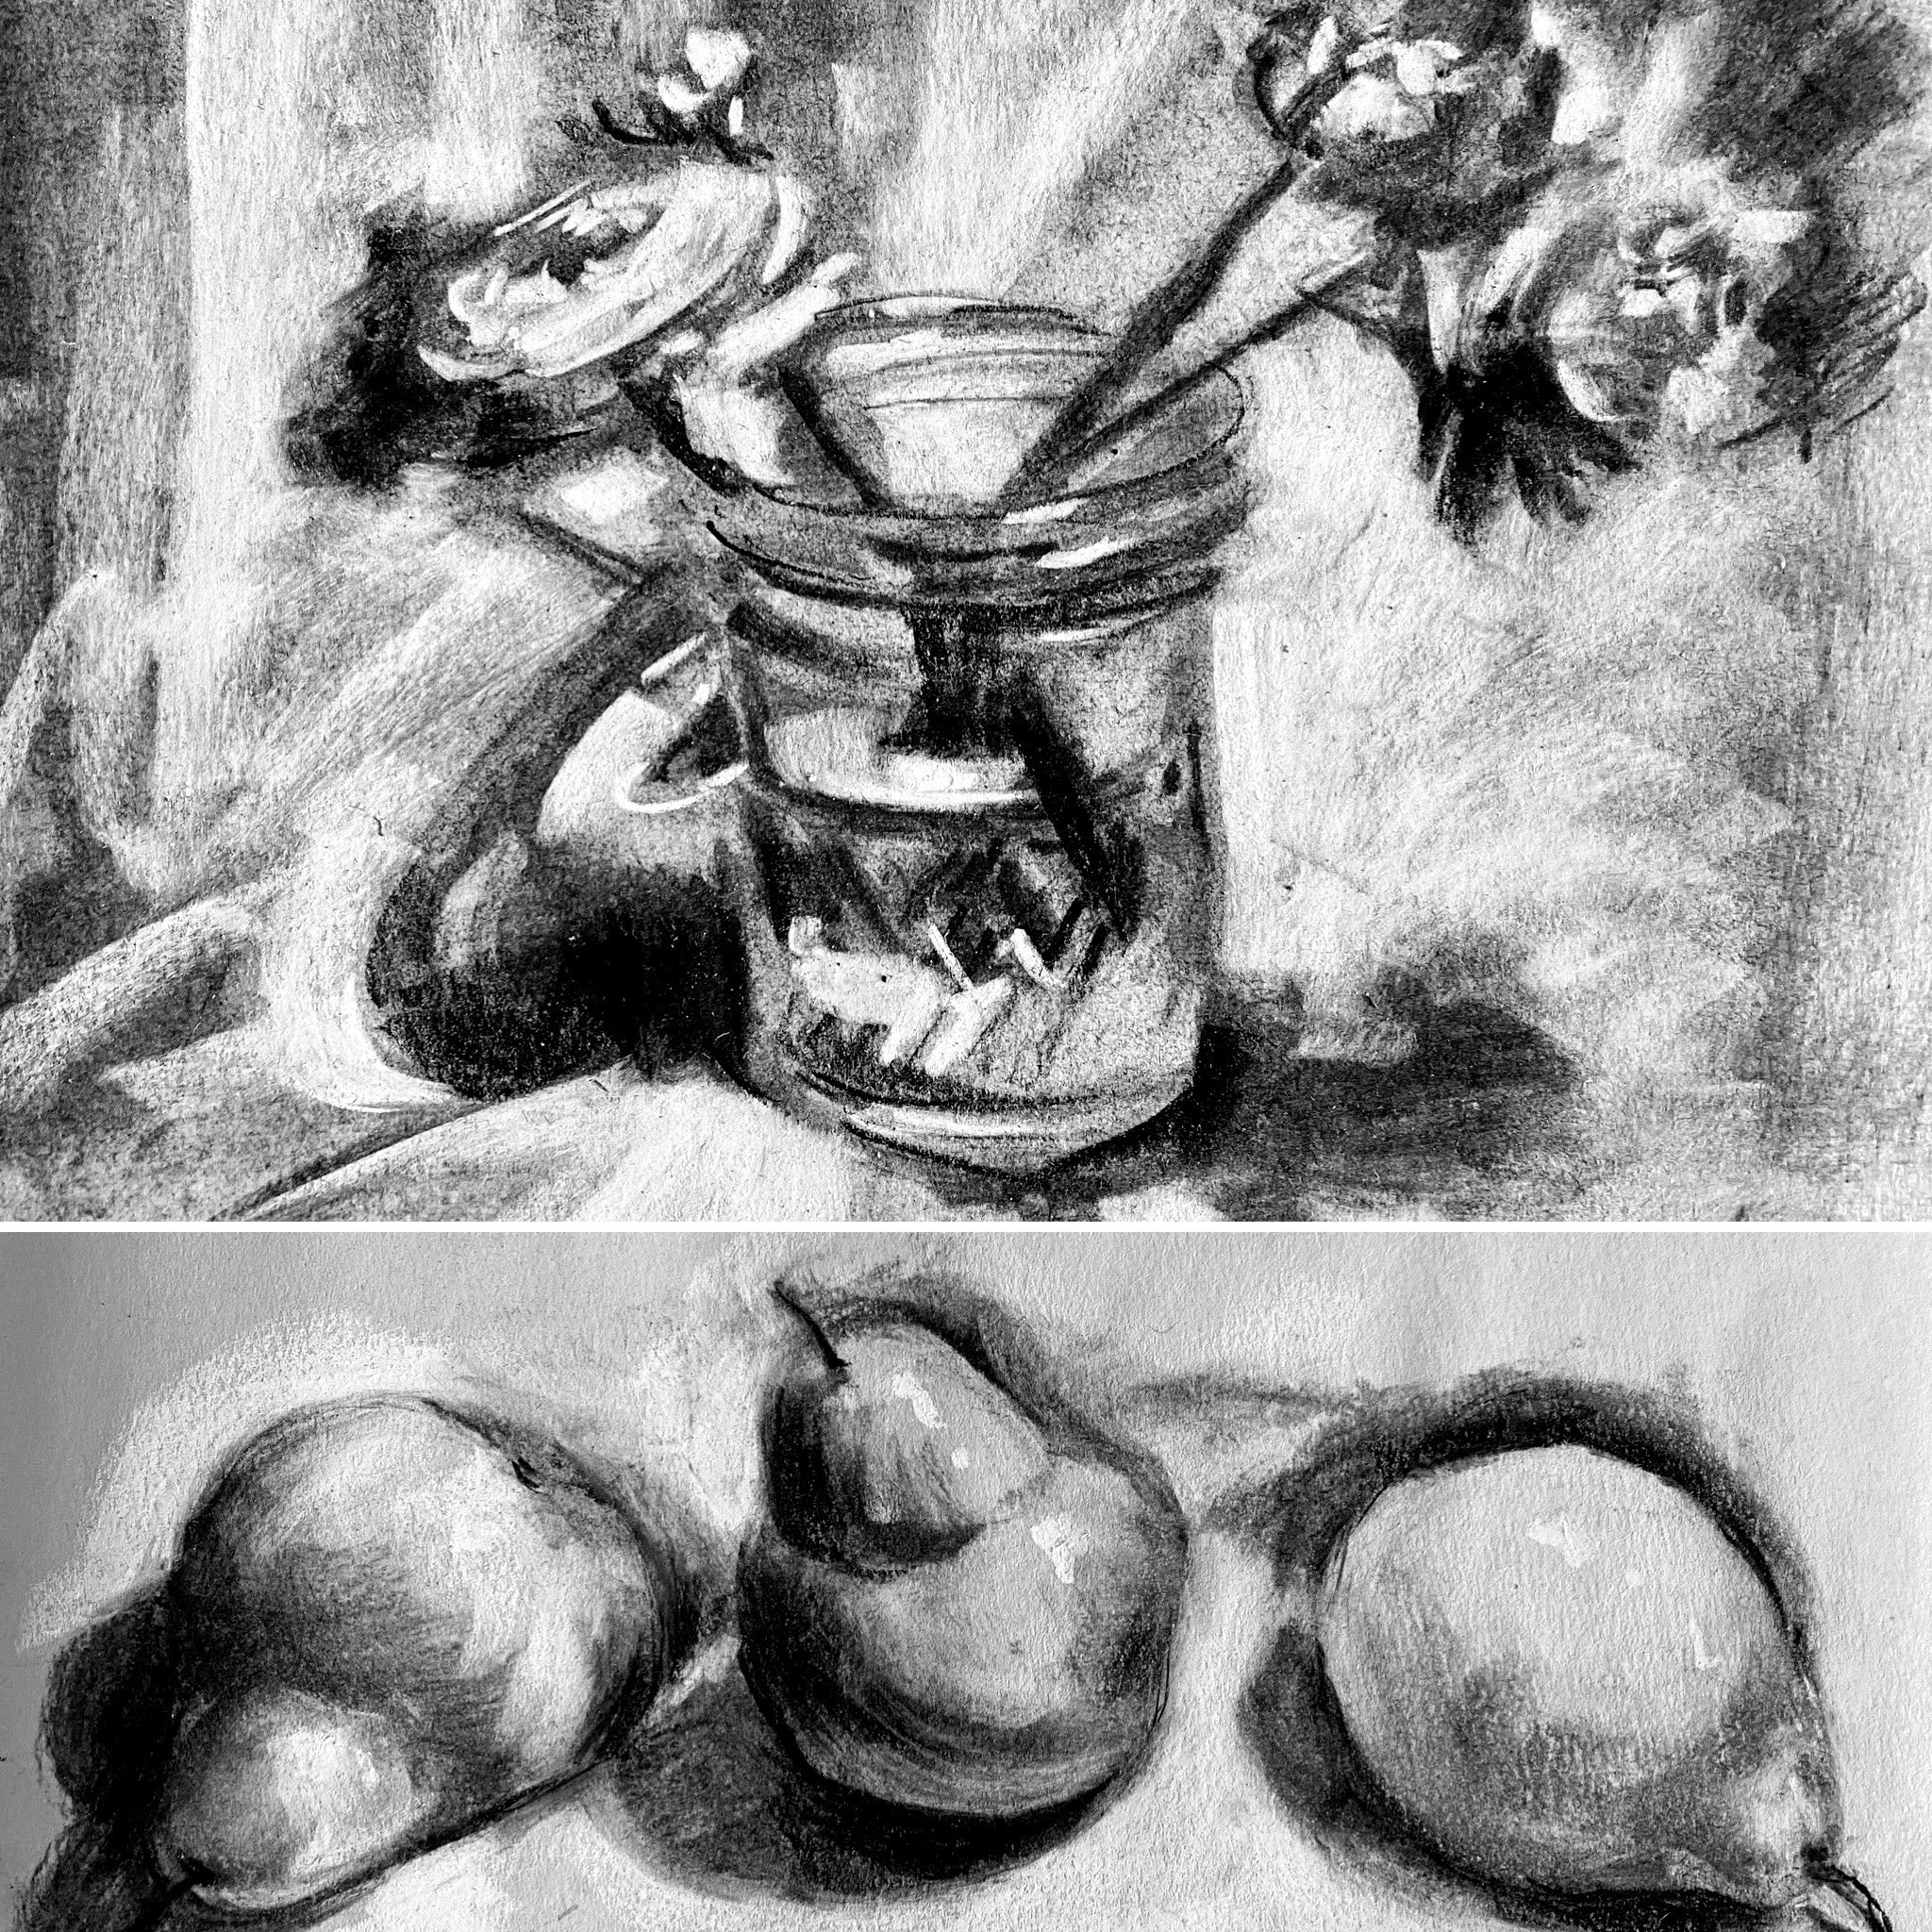 Learn Abstract Charcoal Drawing Techniques - Charcoal Dudek